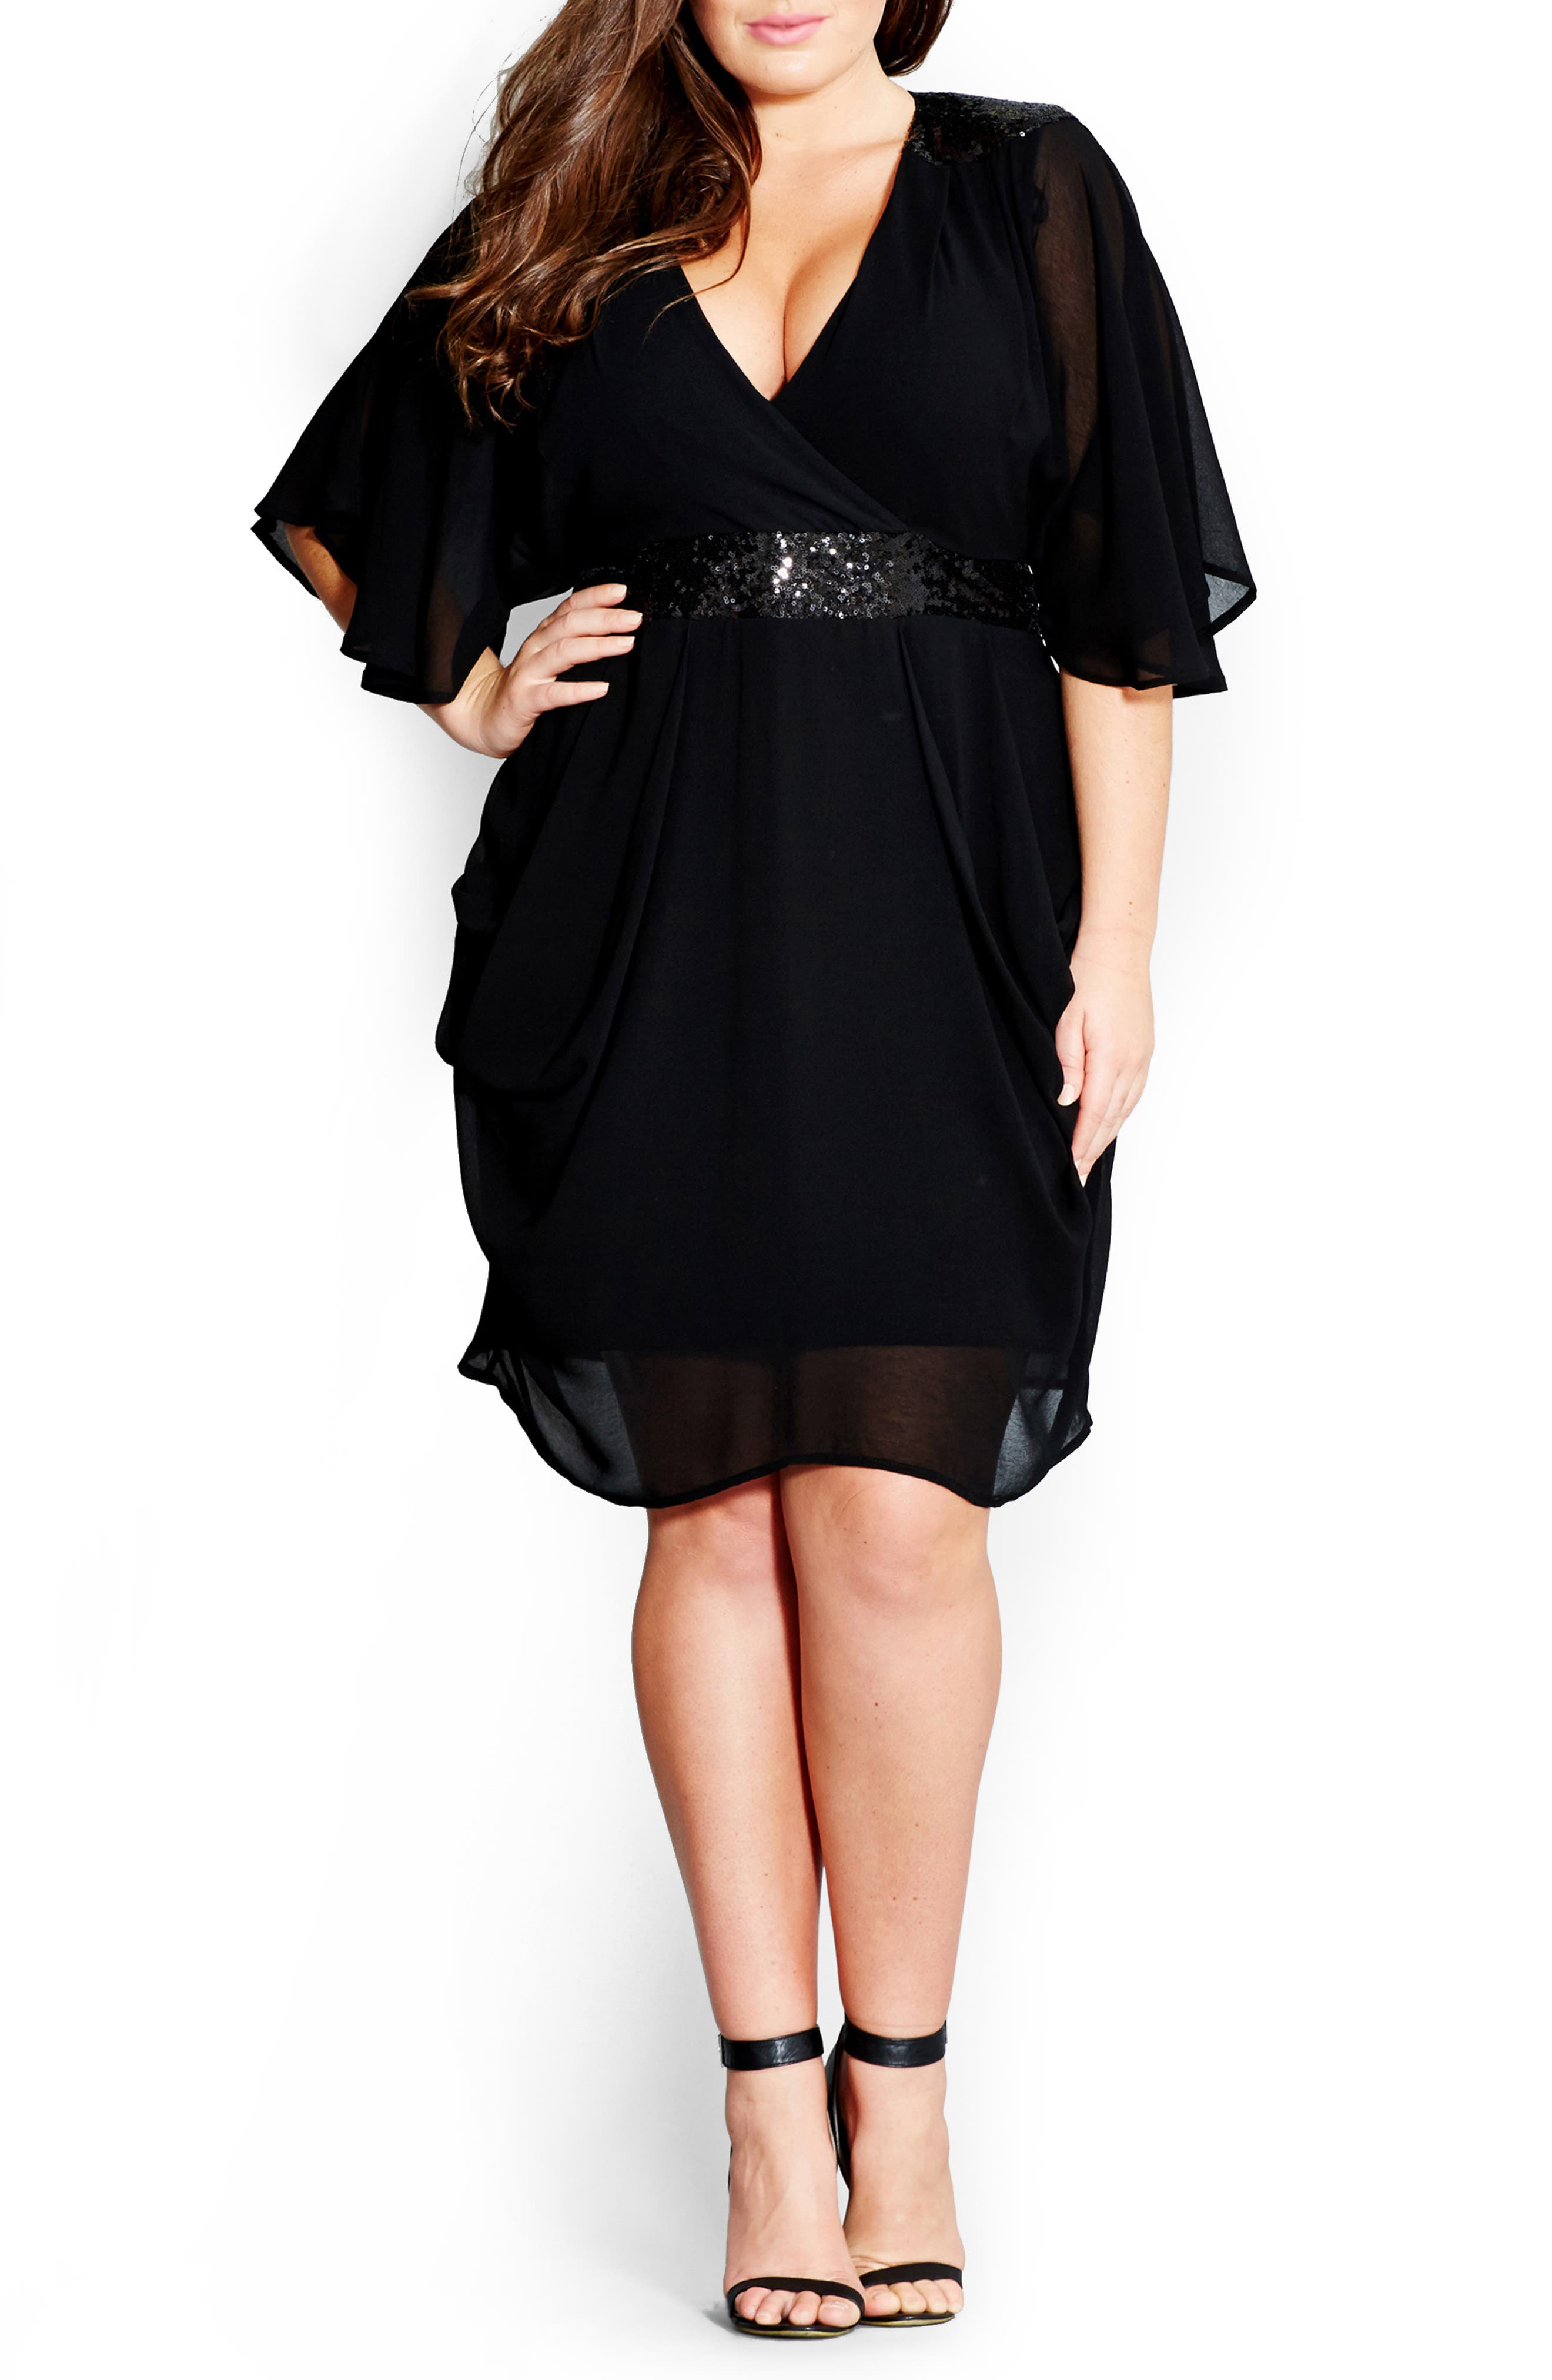 h and m plus size dresses